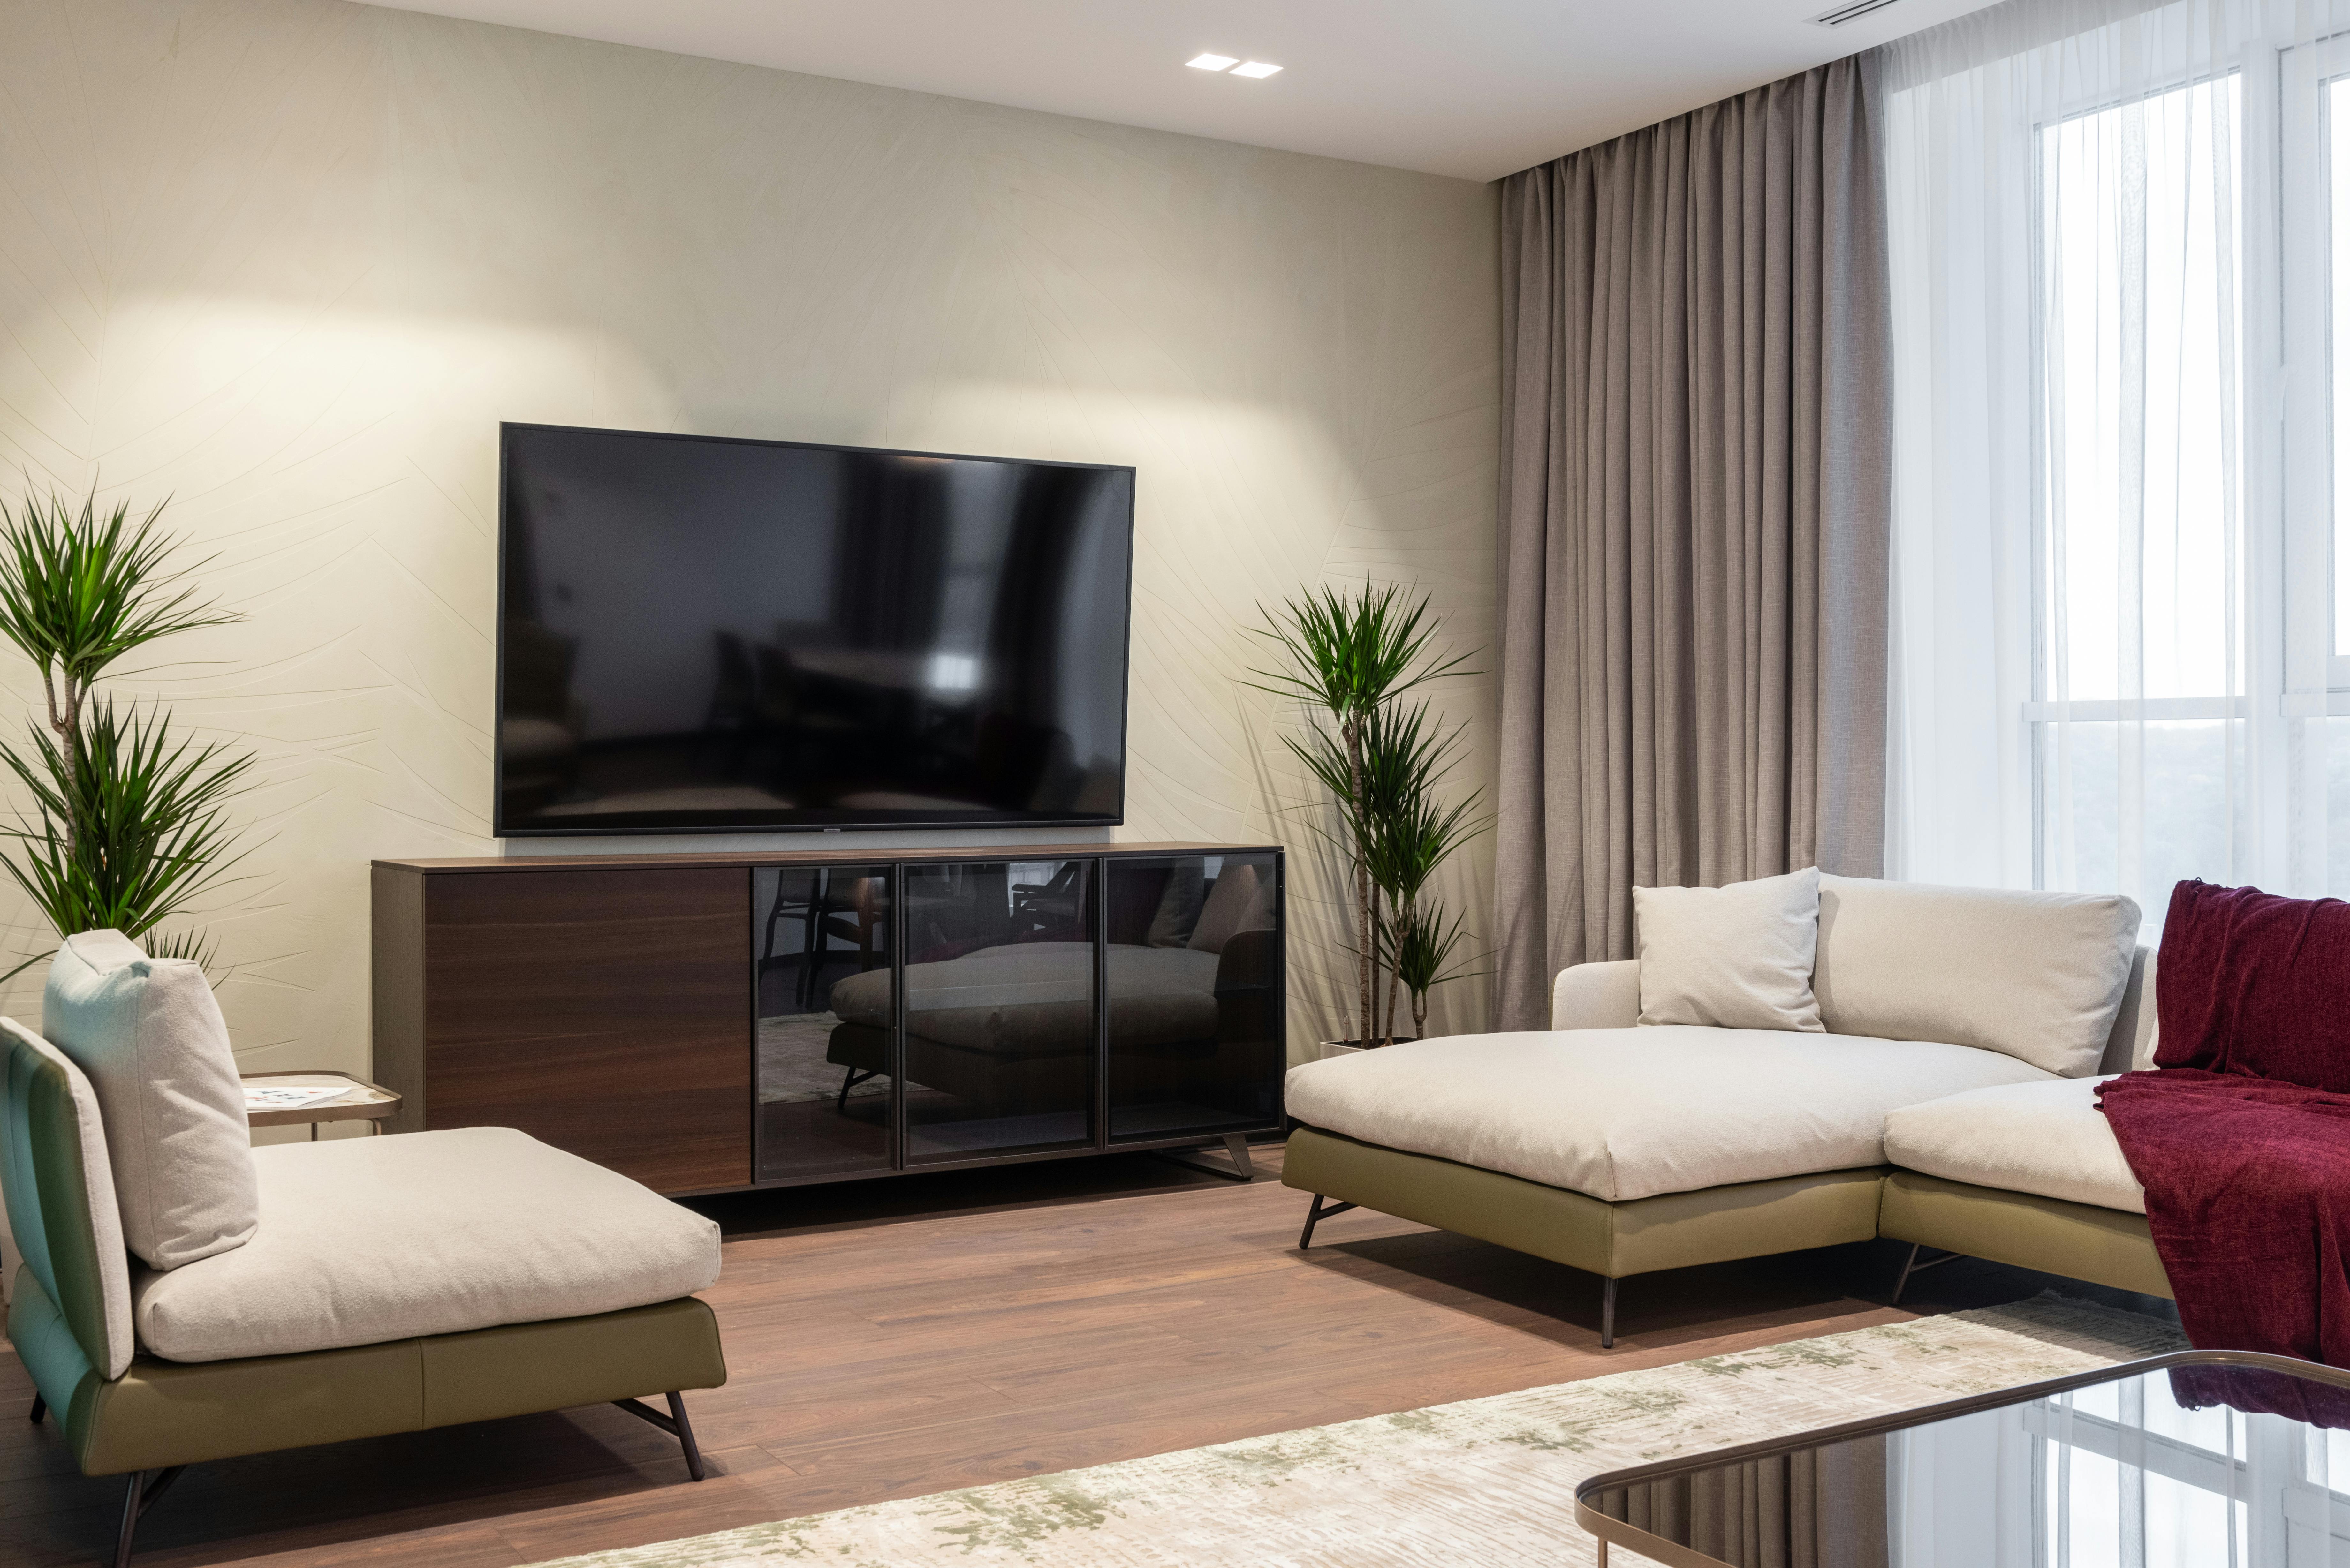 A TV in a living room | Source: Pexels